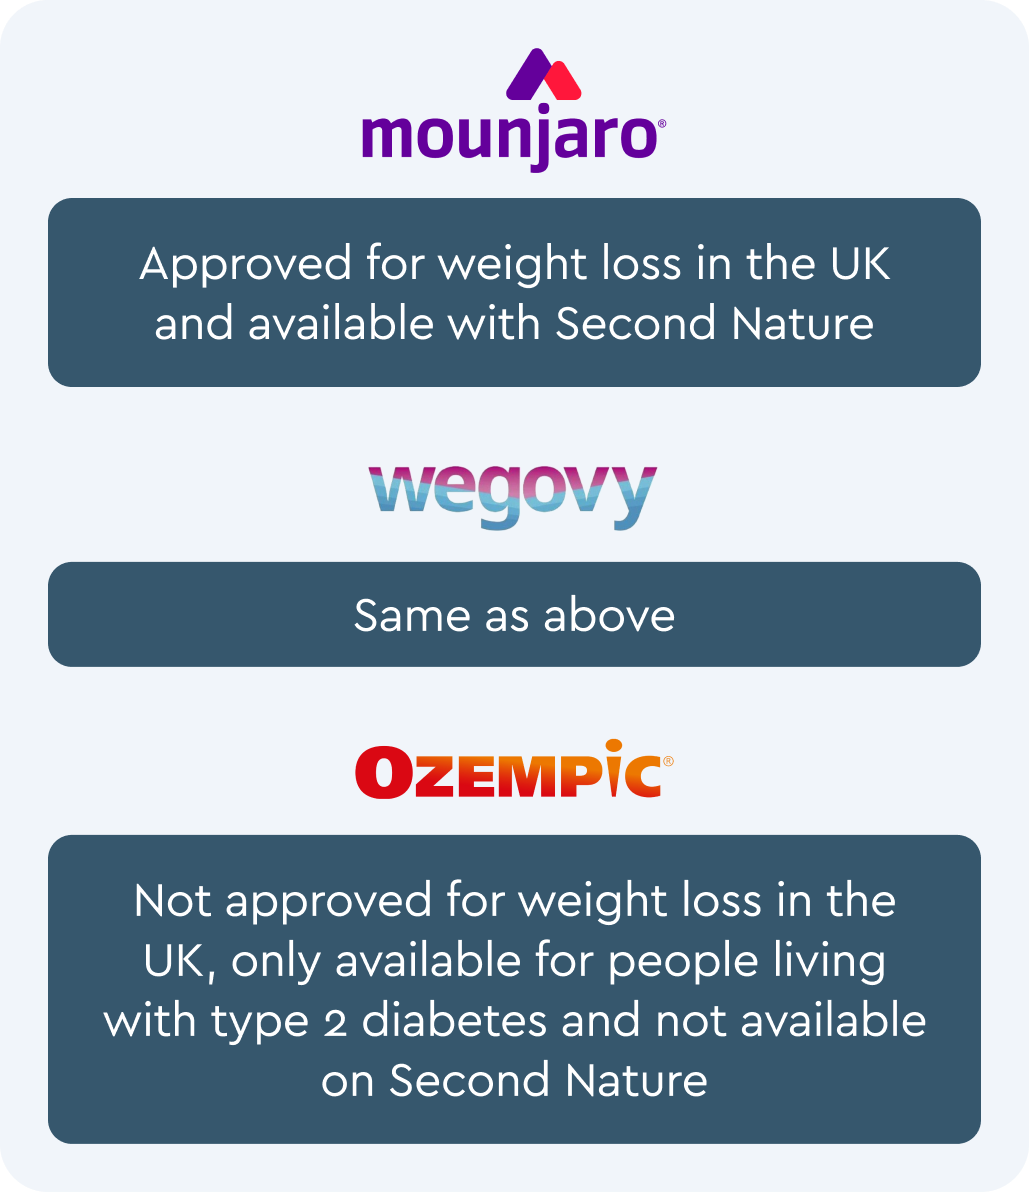 A graphic describing which weight-loss injections are available in the UK, such as Mounjaro and Wegovy, where as Ozempic is only available for type 2 diabetes.